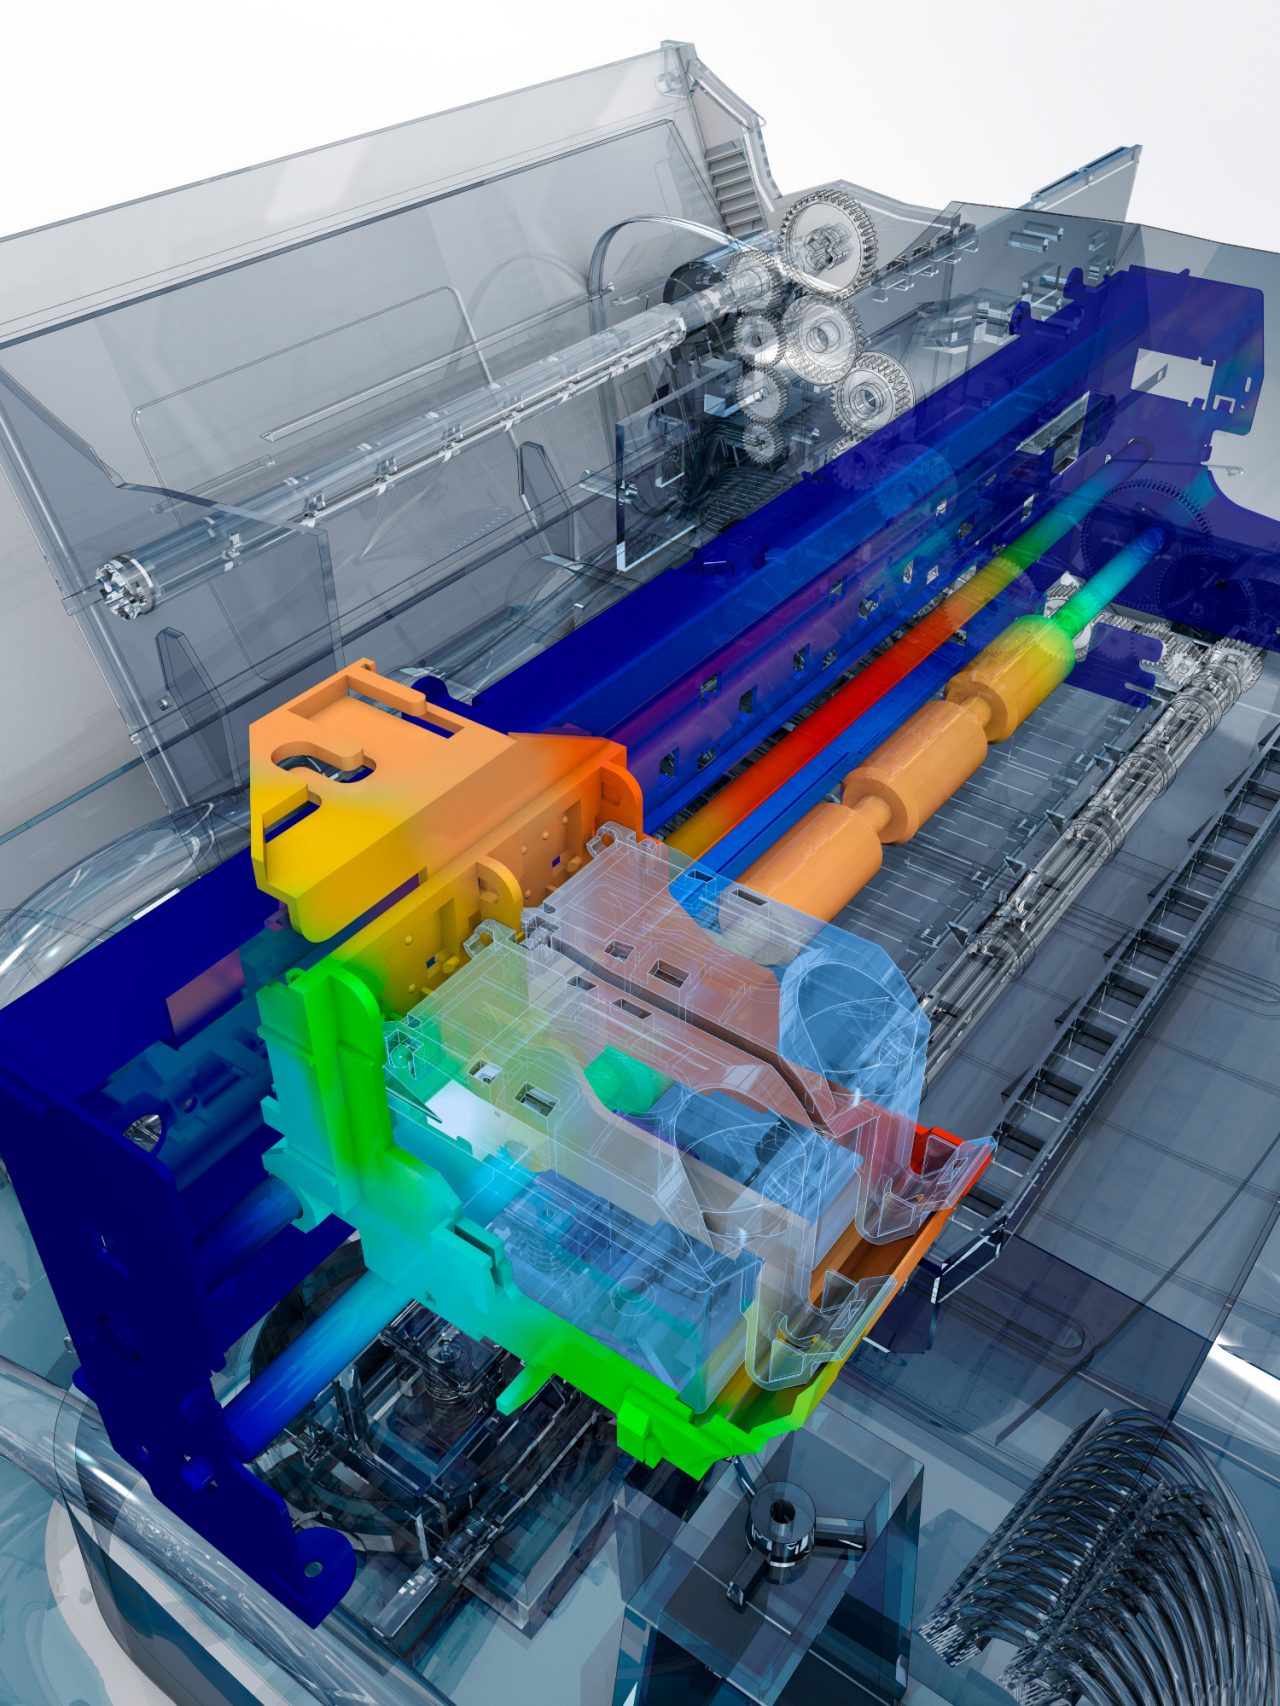 Refreshed version of the 2013 hero image for Simulation Mechanical and Simulation Multiphysics. Simulation of a printer subassembly subjected to a gravity load. Designed in Autodesk(r) Inventor(r) software. Simulated using Autodesk(r) Simulation Multiphysics software. 